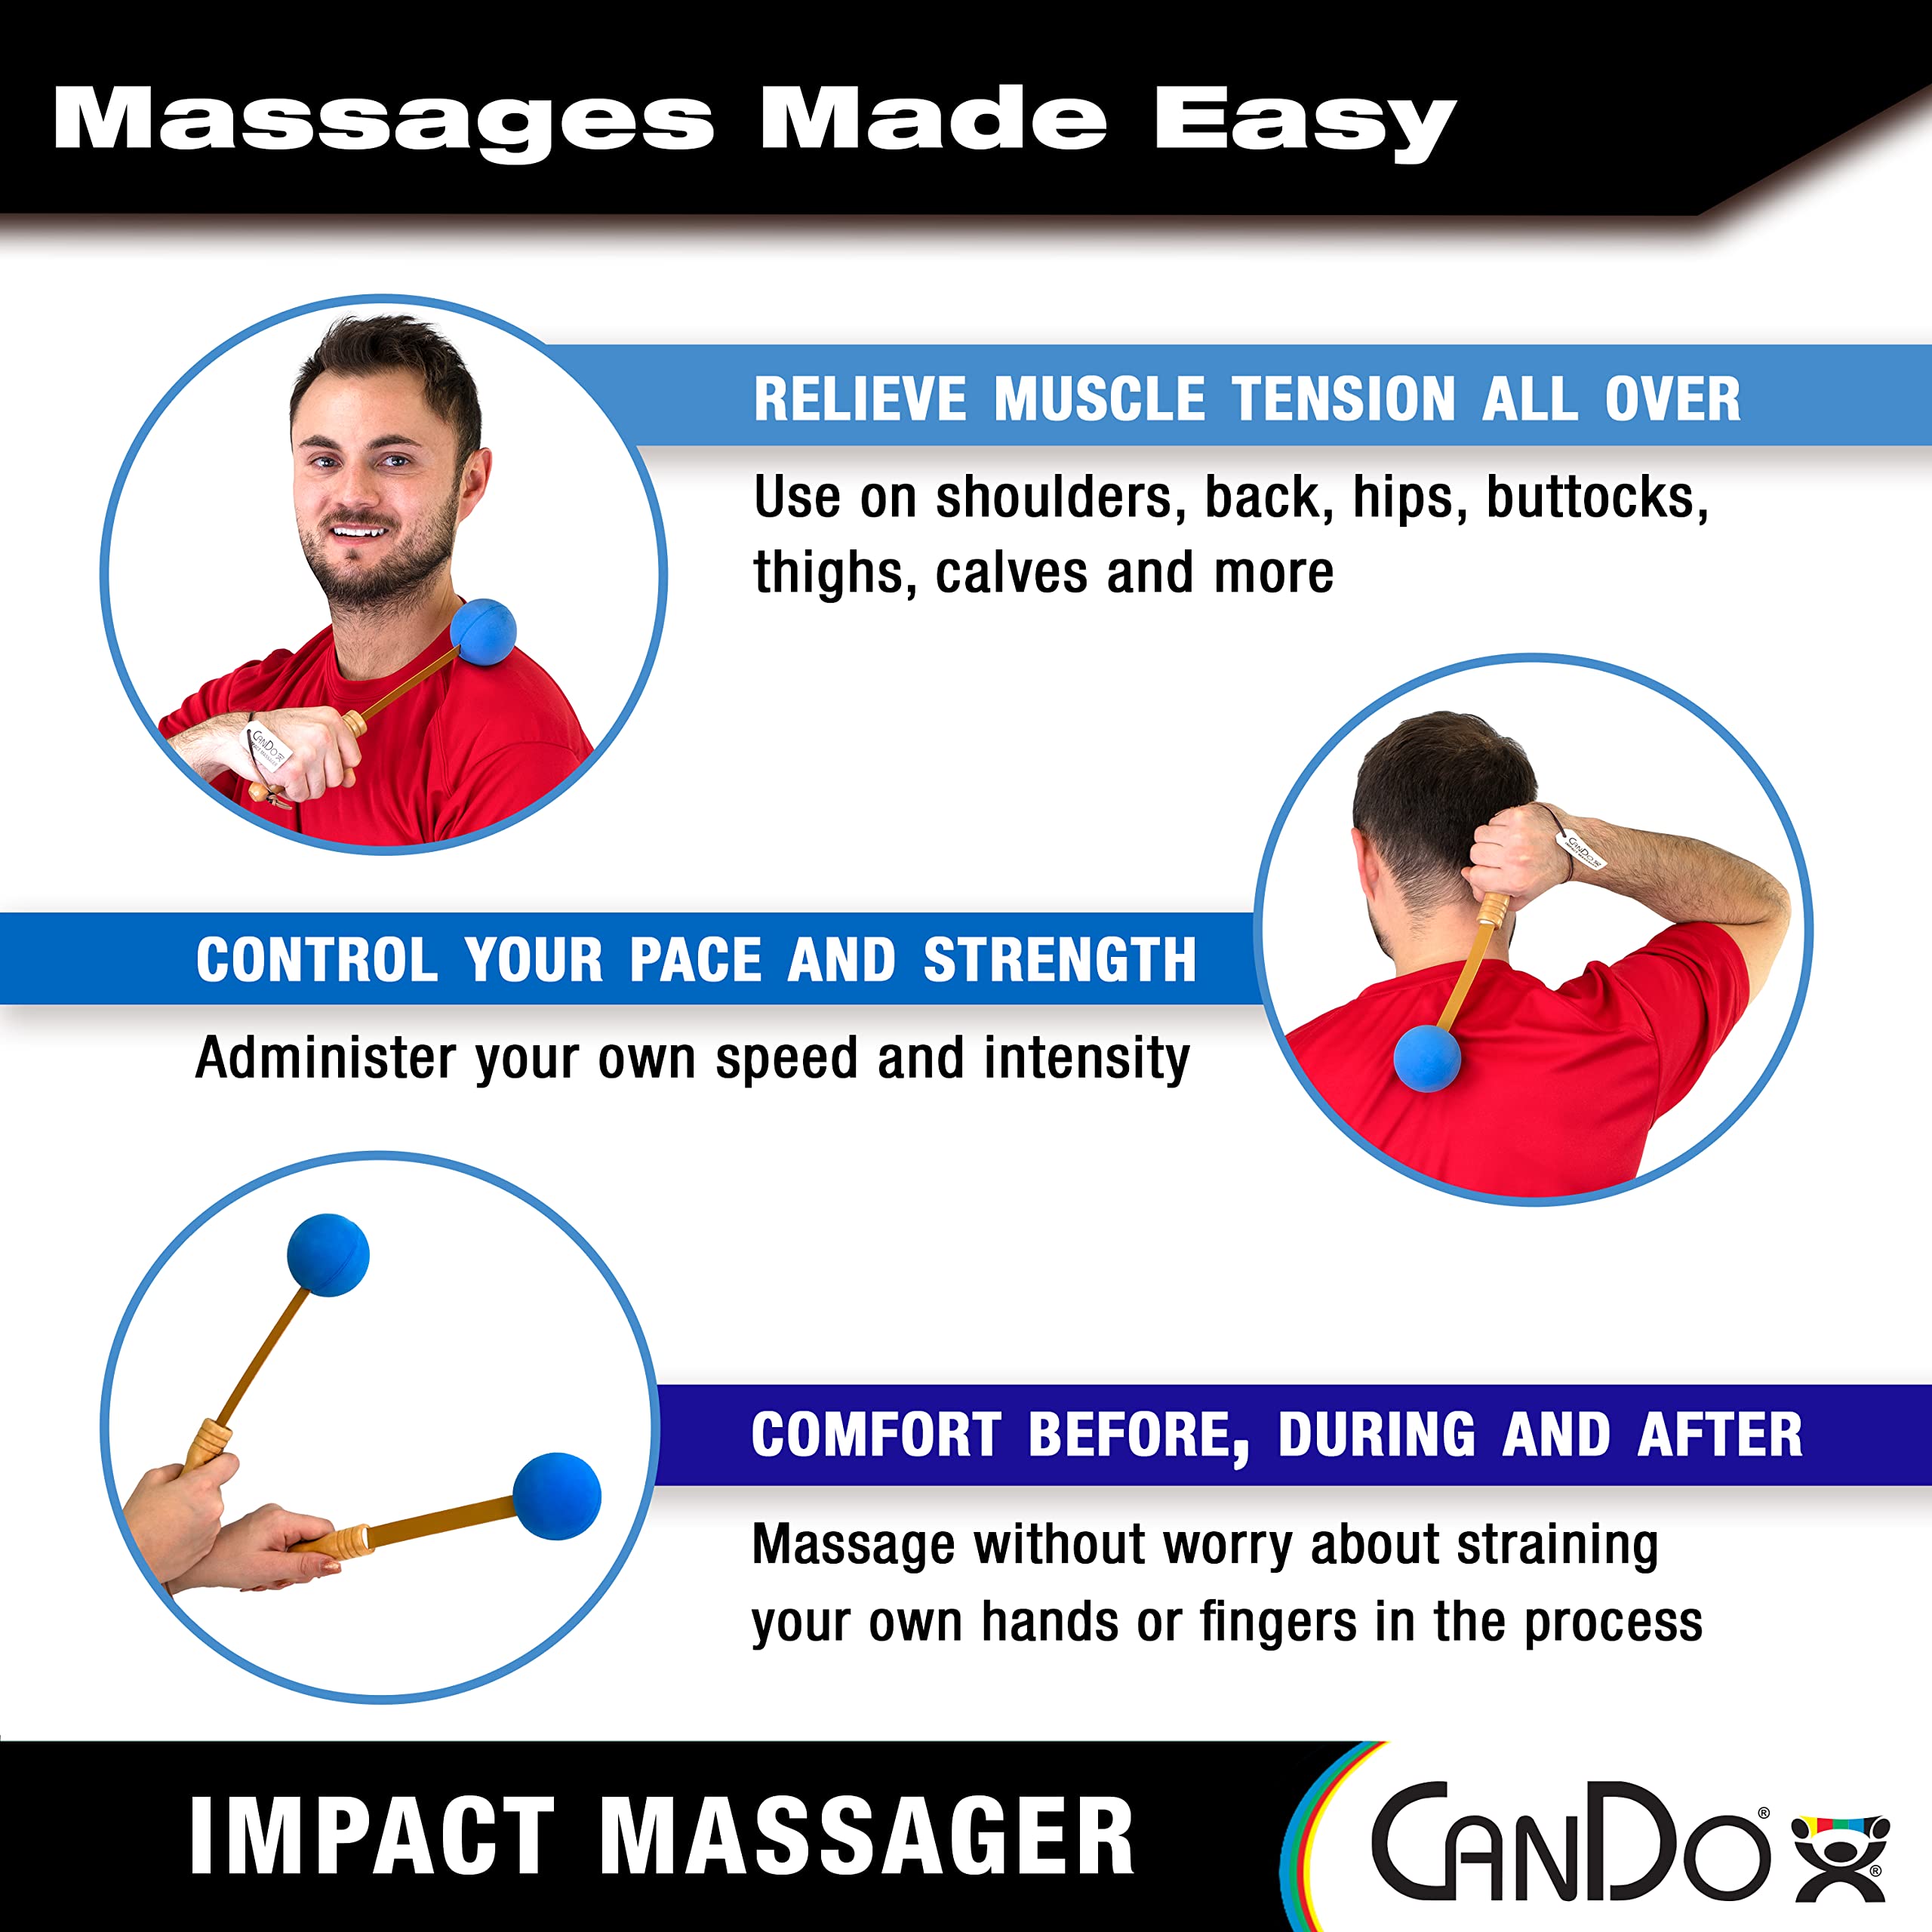 CanDo Percussion Massagers 2 Pack Manual Ball Massage, Flexible Stick Massage Tools for Sore Muscles, Back, Shoulders, Neck, Legs, and Total Body with Comfort Grip Wood Handles, Blue